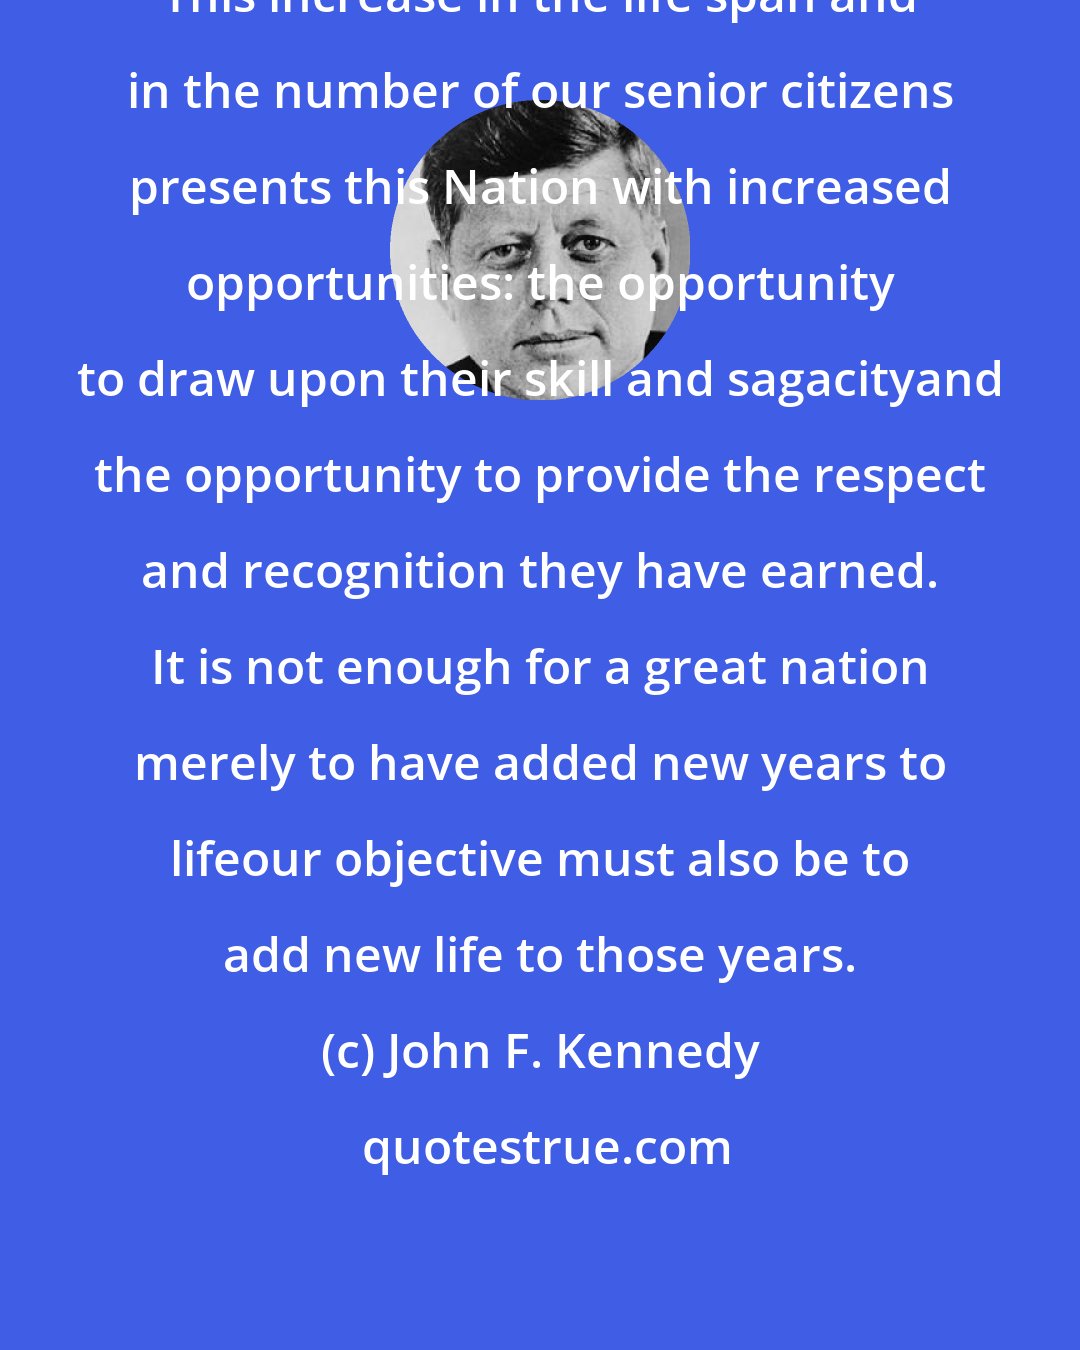 John F. Kennedy: This increase in the life span and in the number of our senior citizens presents this Nation with increased opportunities: the opportunity to draw upon their skill and sagacityand the opportunity to provide the respect and recognition they have earned. It is not enough for a great nation merely to have added new years to lifeour objective must also be to add new life to those years.